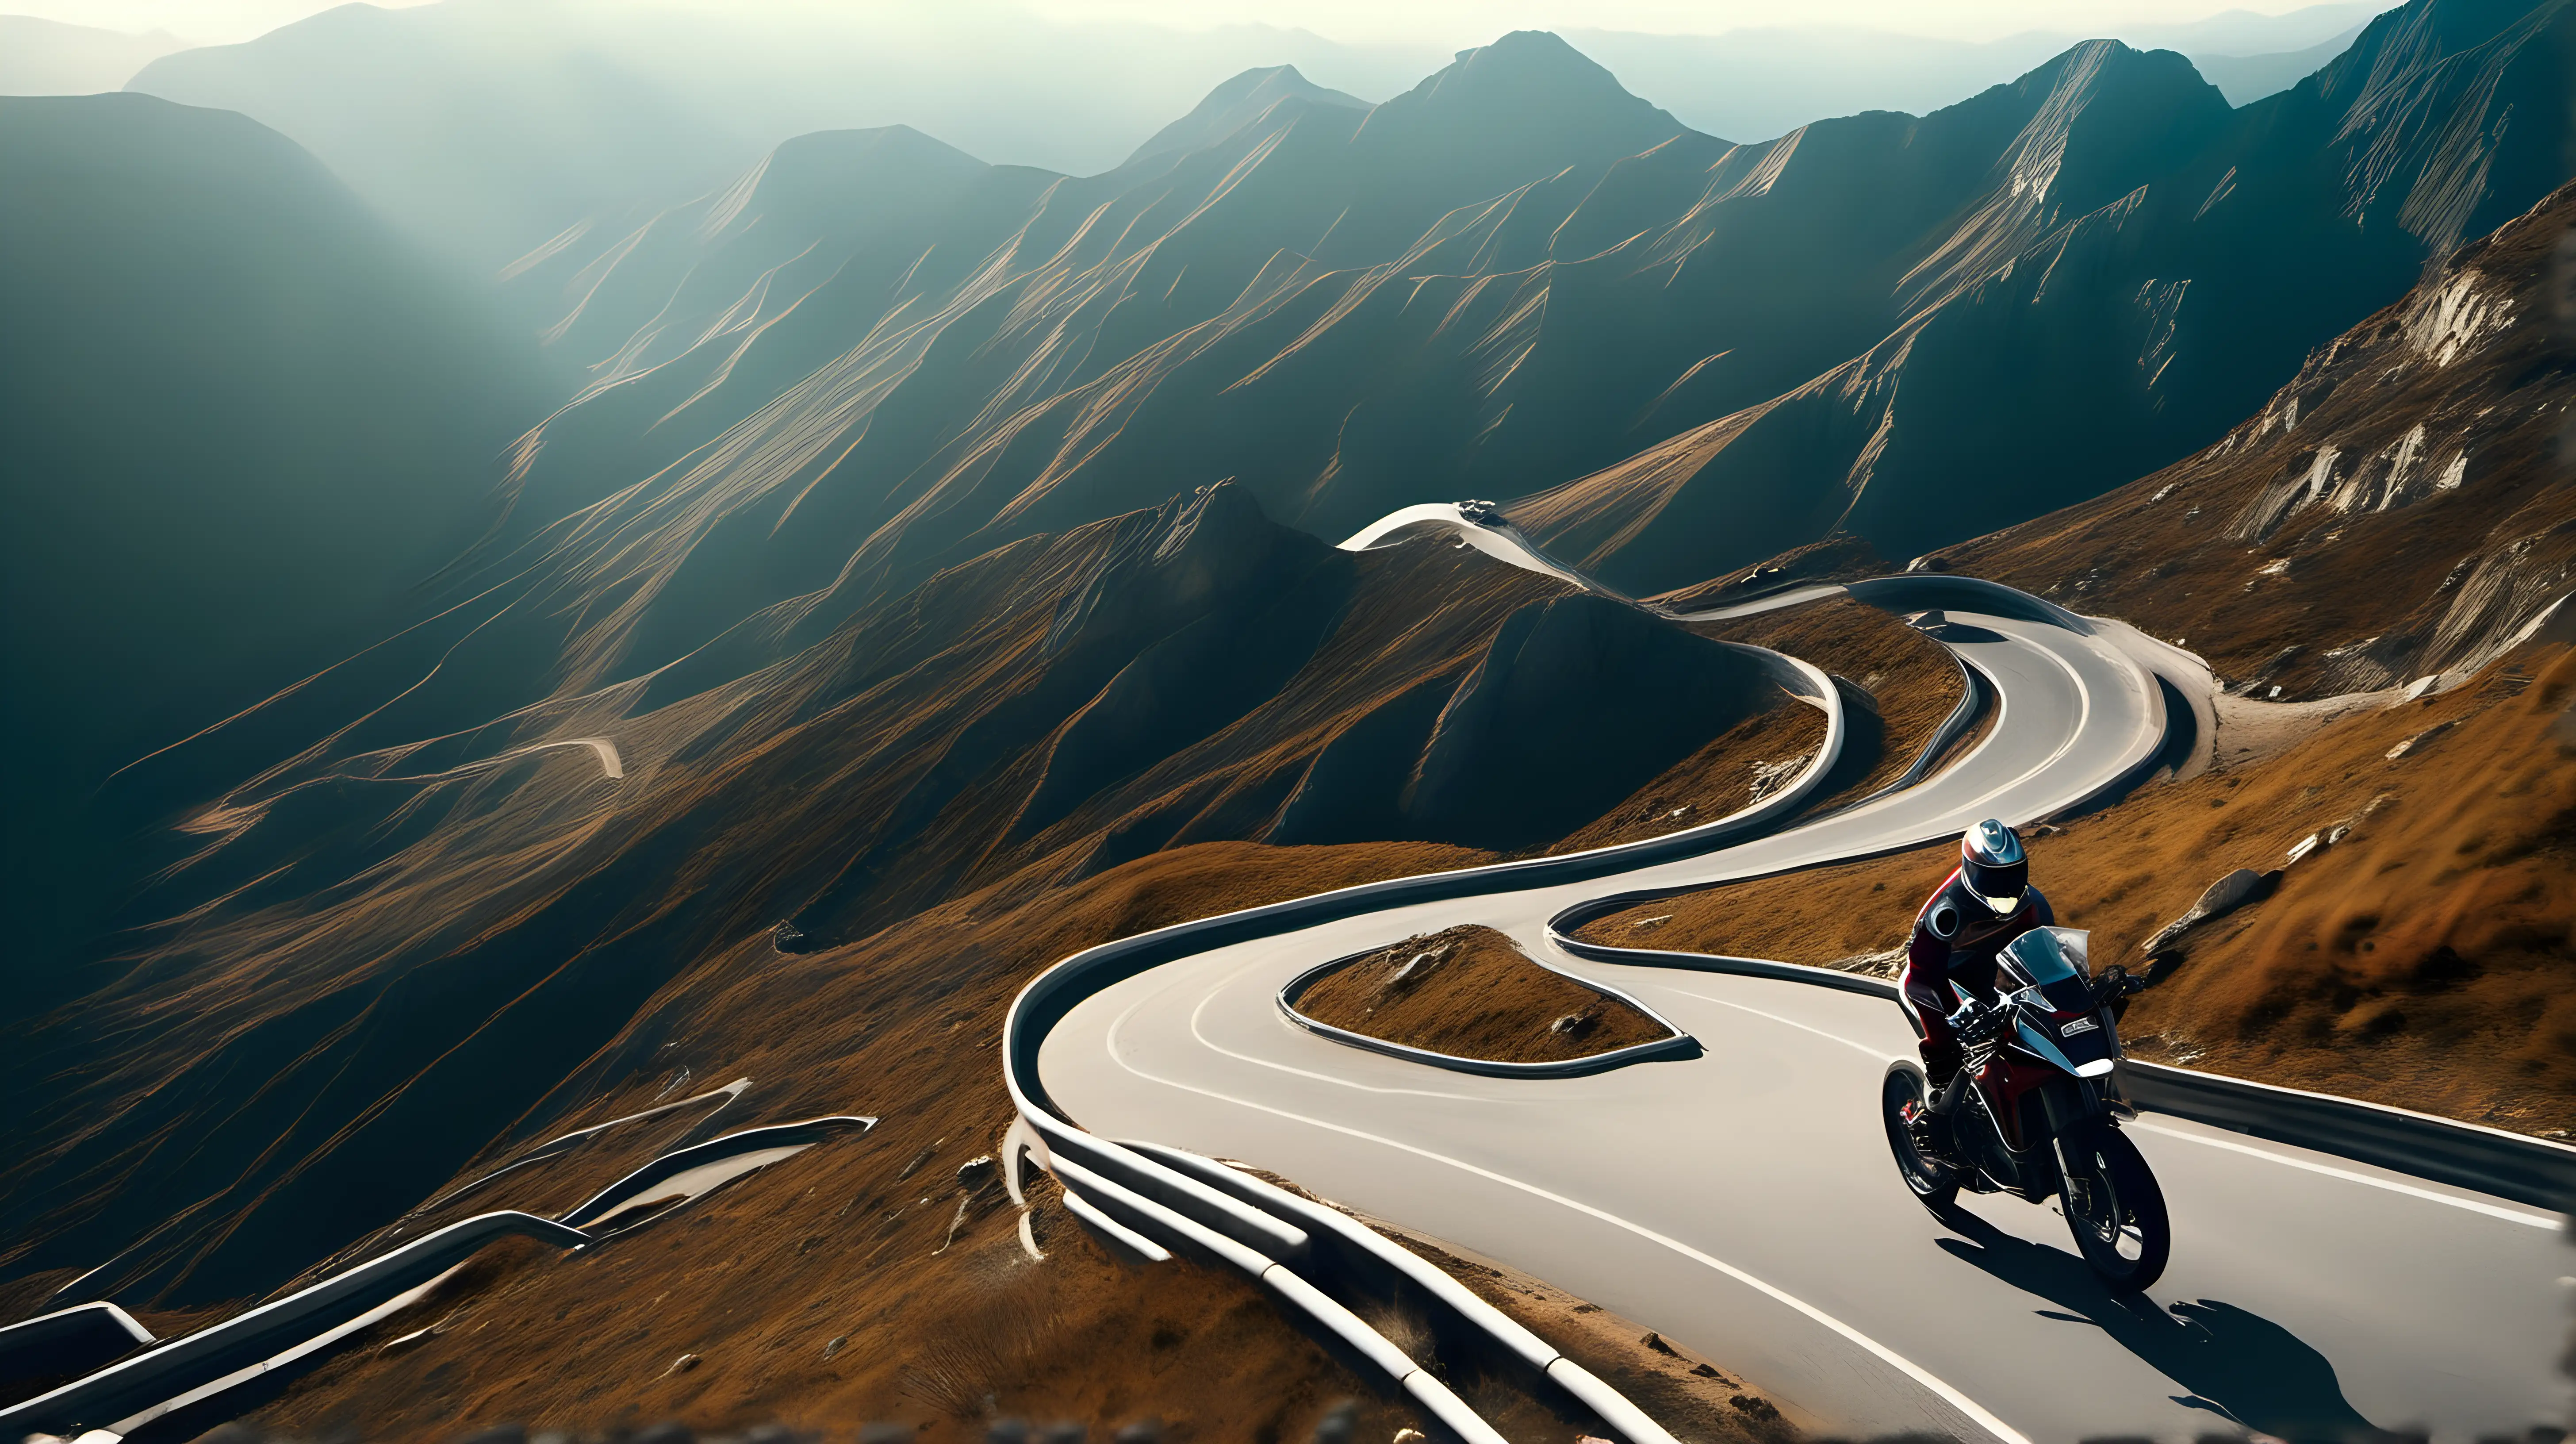 A breathtaking shot of a racing bike and rider navigating a series of hairpin turns on a mountain pass, with the rugged terrain stretching out majestically in the background.